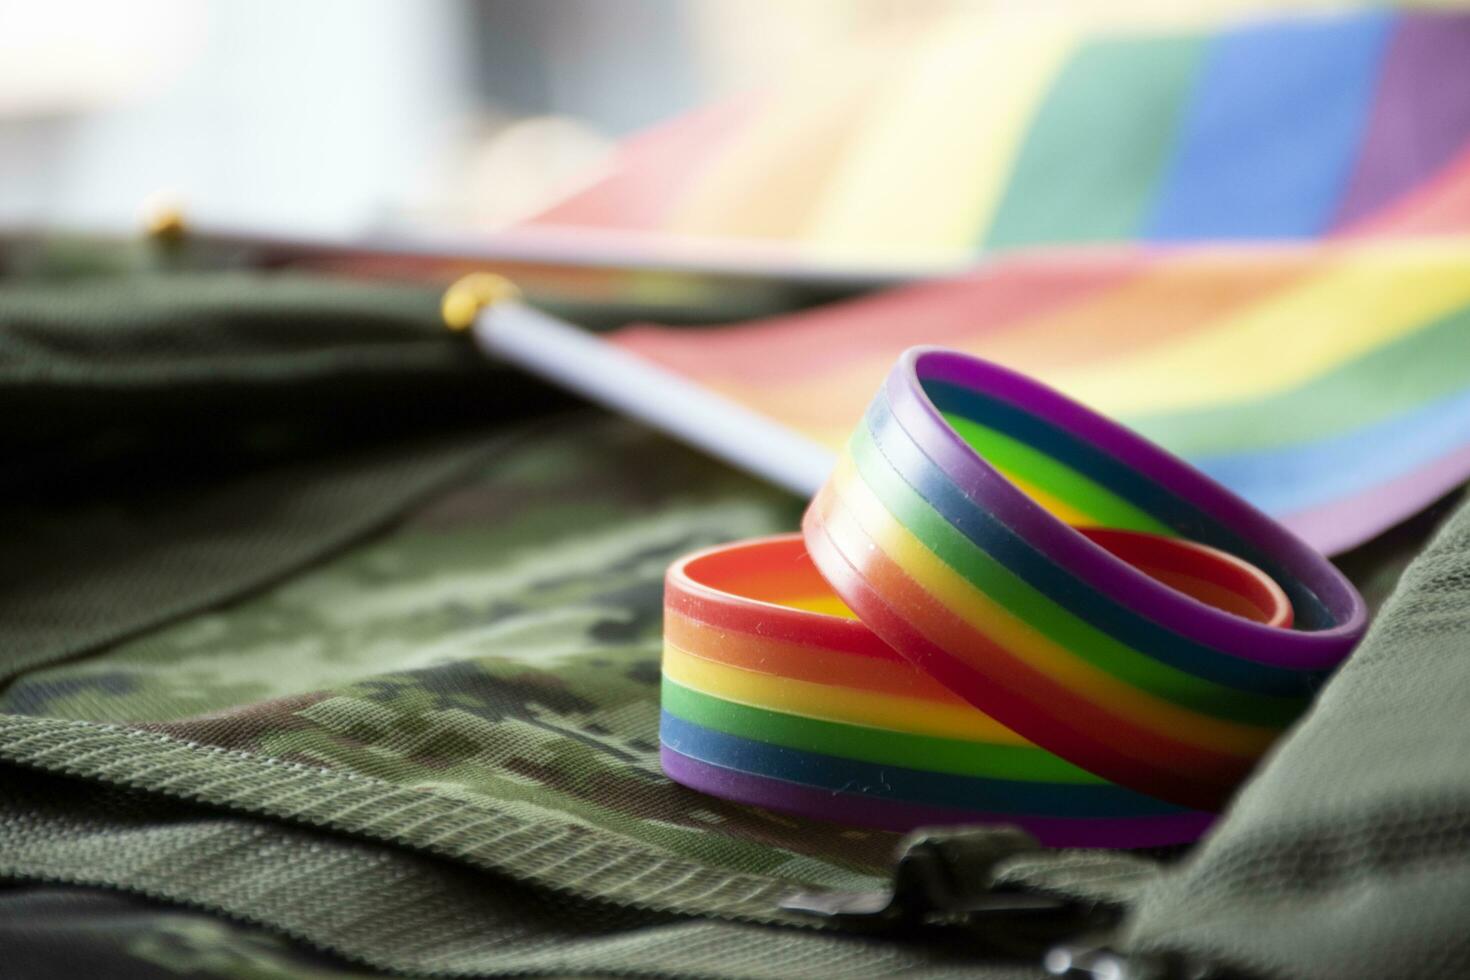 Rainbow flag and rainbow wristbands on camouflage background, concept for celebrations of LGBT people in pride month around the world, soft and selective focus on wristband. photo